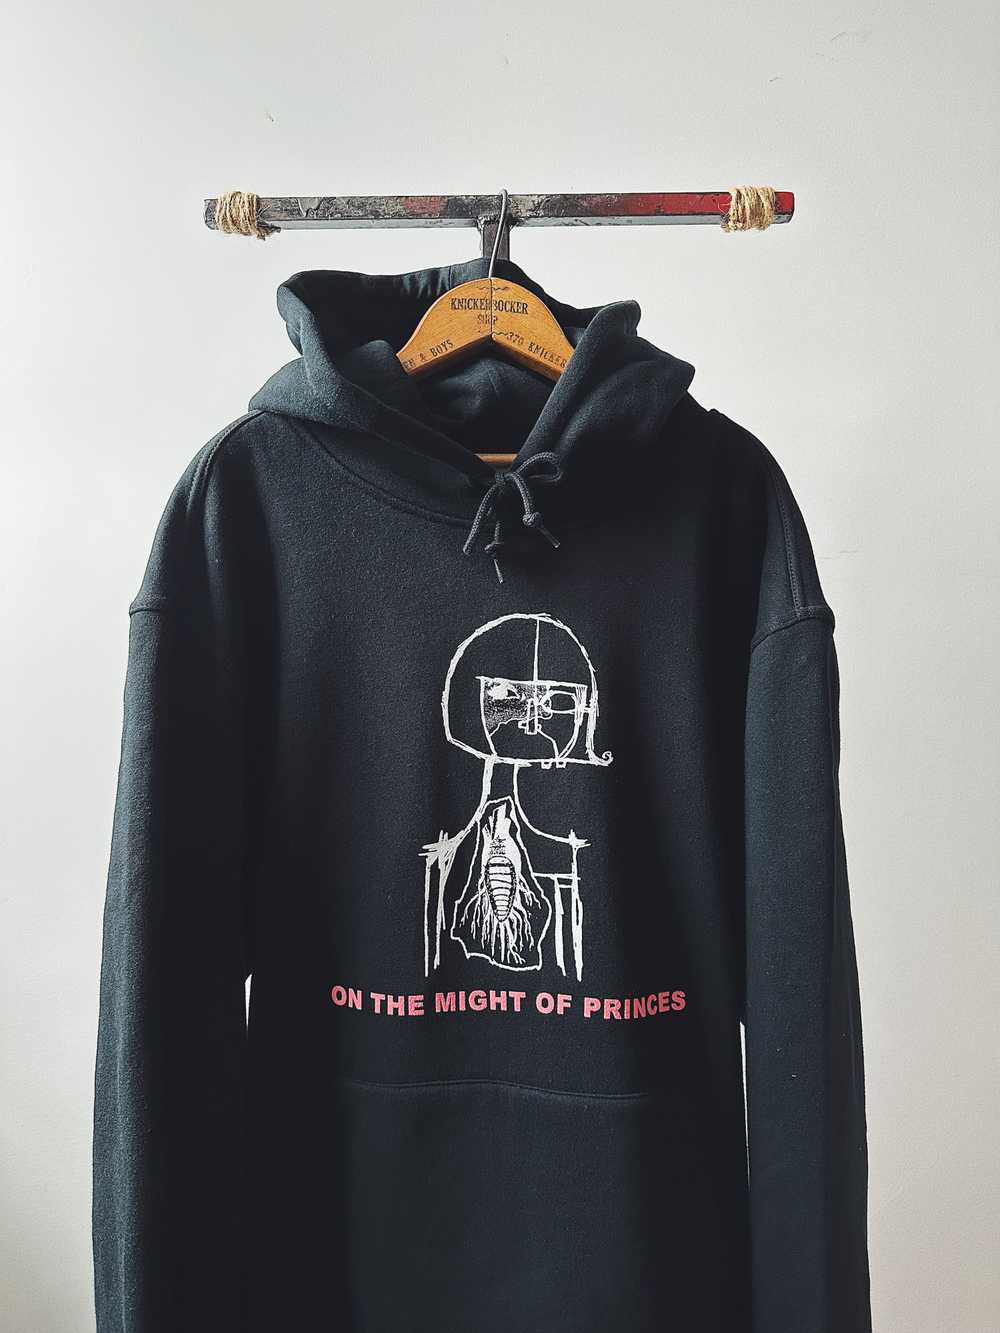 On The Might Of Princes "Sirens" Hoodie - image 1